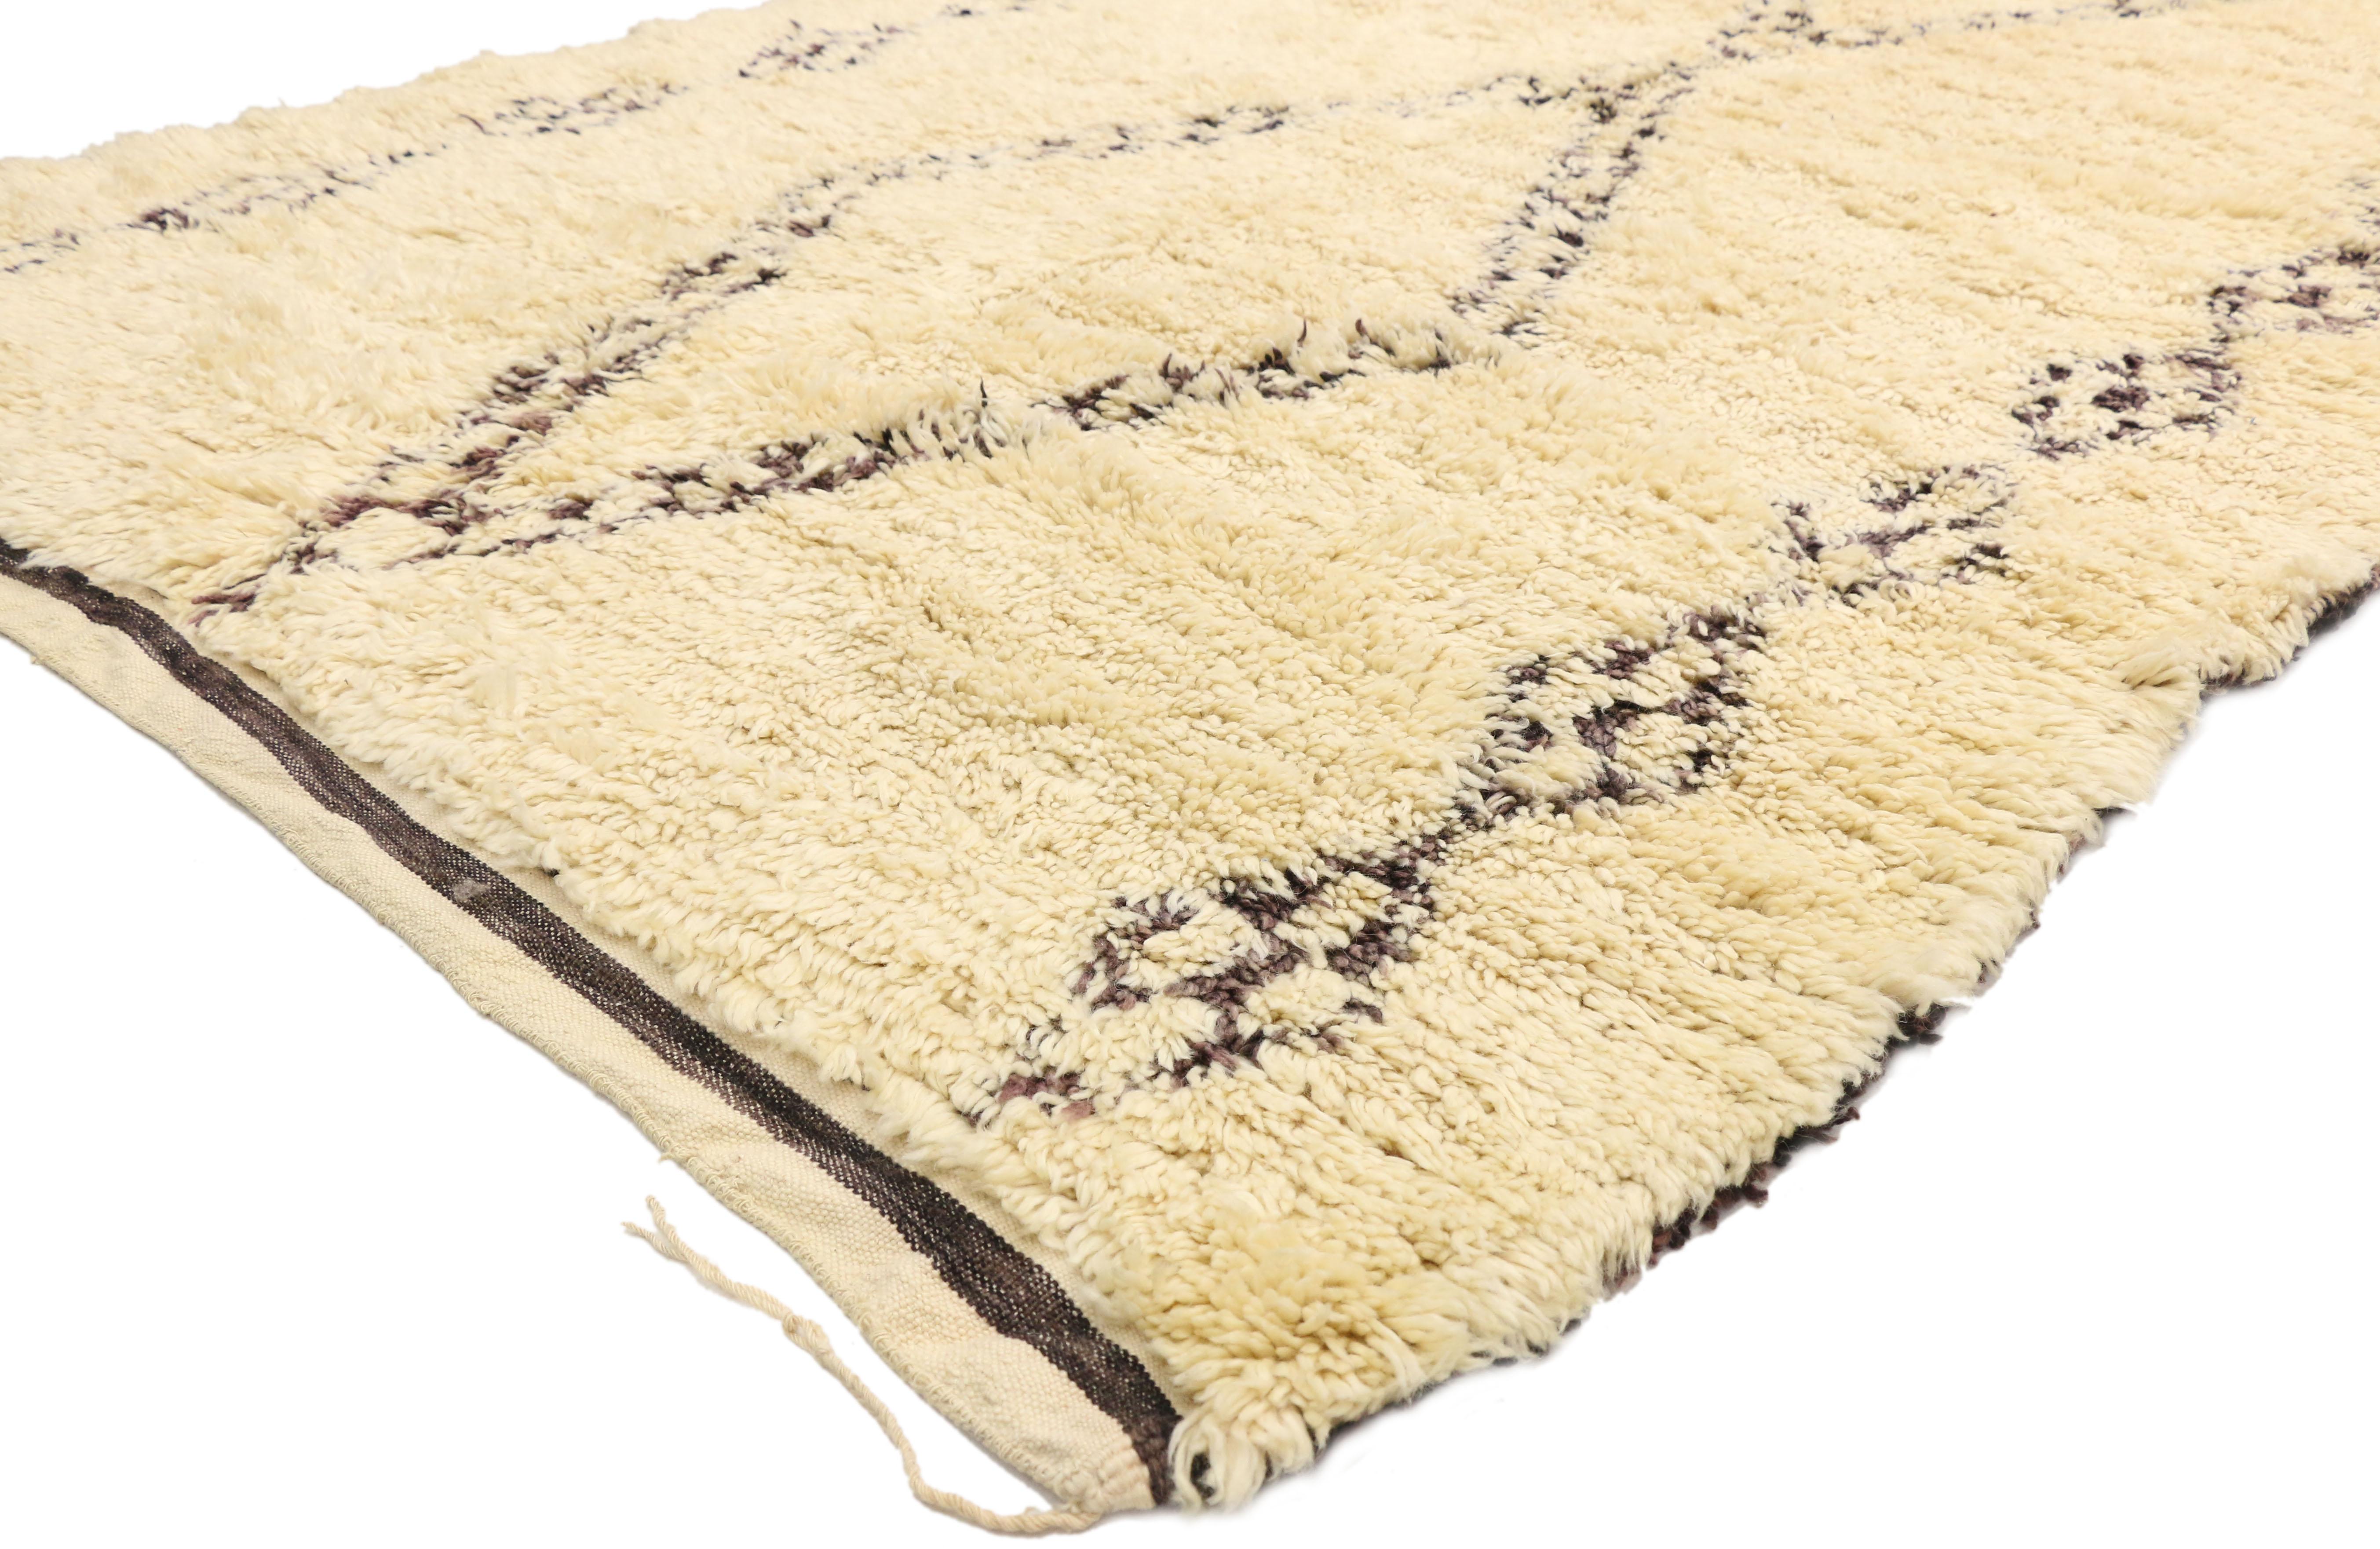 20769, Contemporary Beni Ourain Moroccan Rug with Minimalist Style. This hand knotted wool contemporary Moroccan Beni Ourain rug features three columns of a variety of diamond shapes spread across an abrashed cream field. Two large diamonds and the